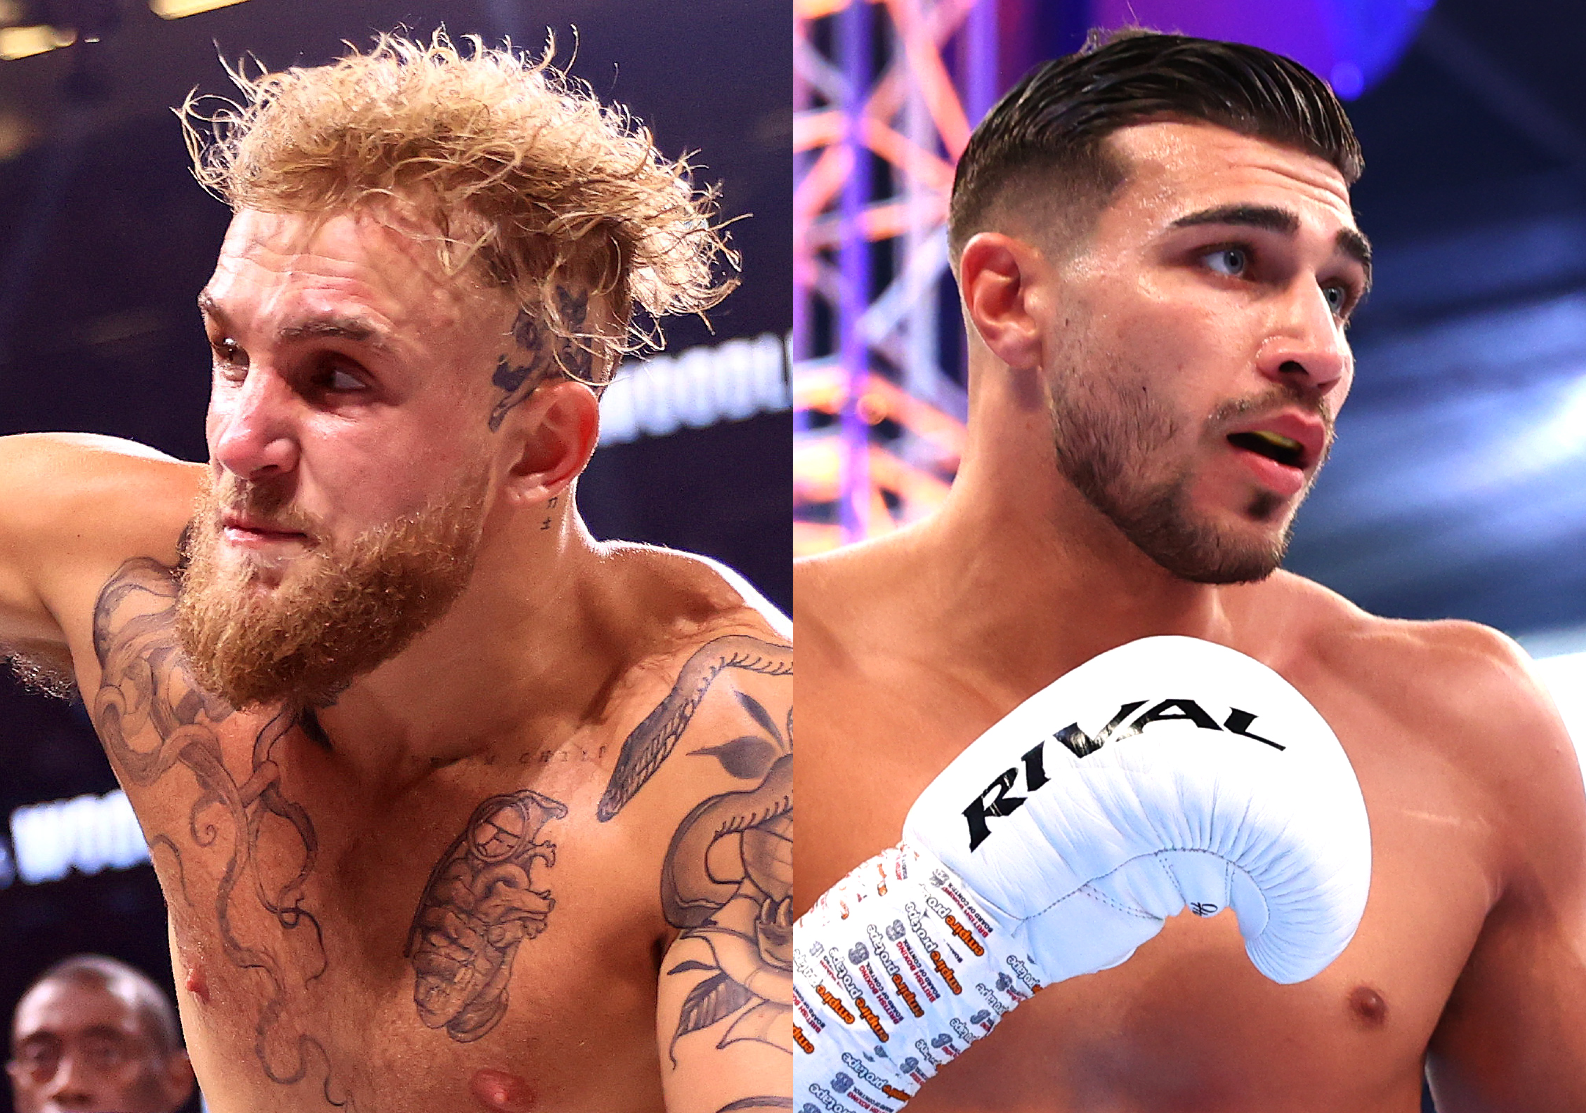 Jake Paul and Tommy Fury are barking again, and it does look like they’ll fight in August